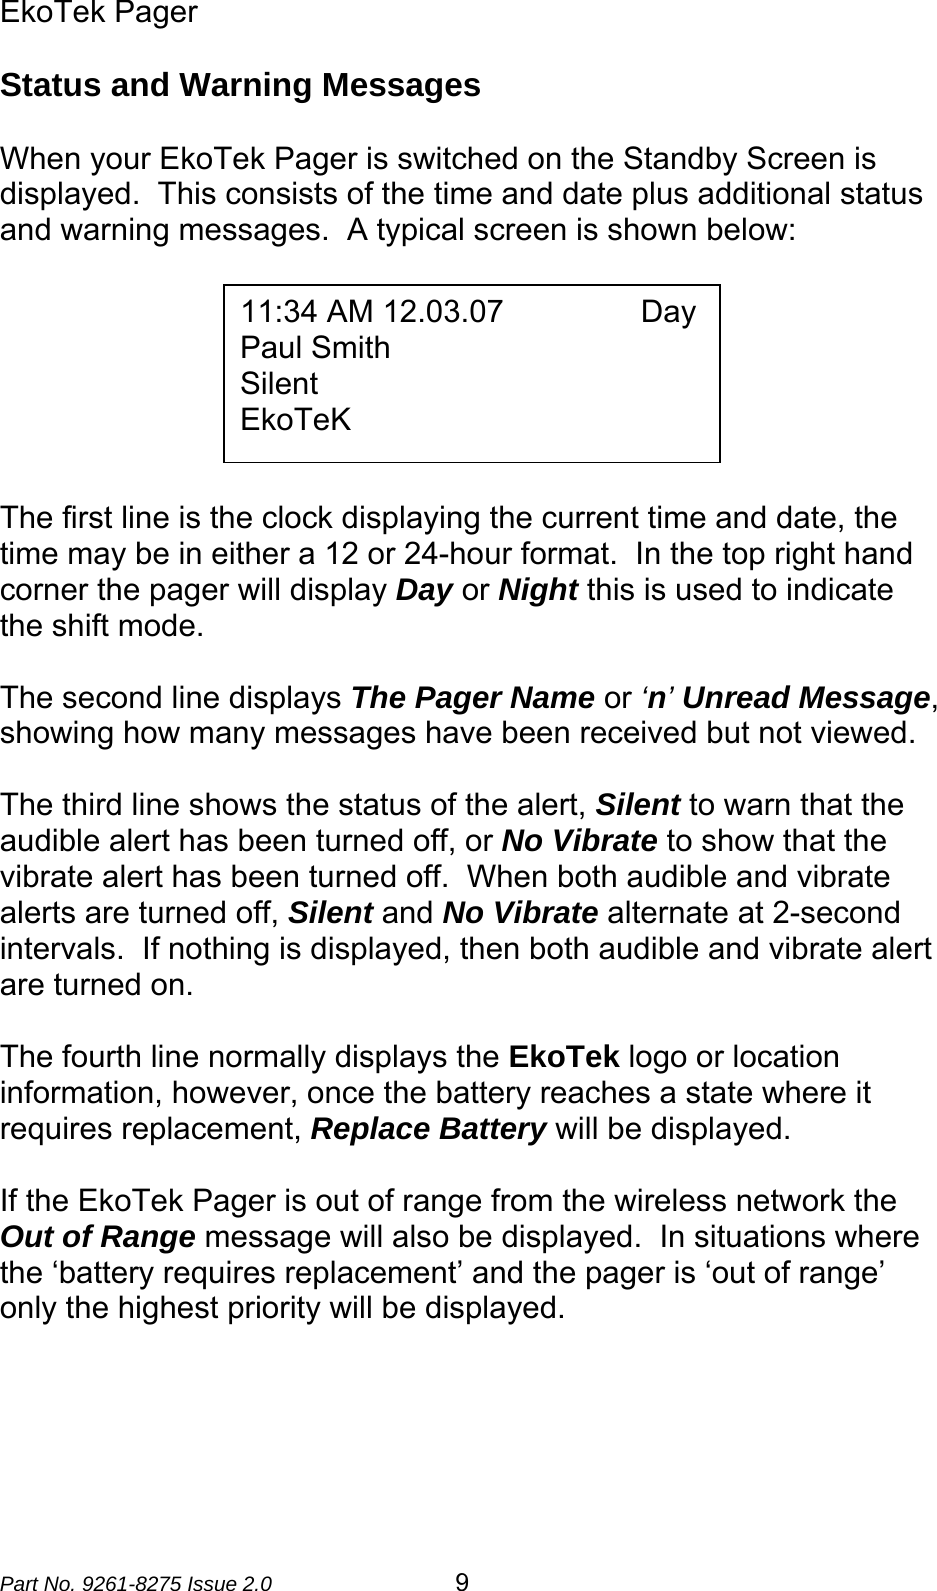 EkoTek Pager  Part No. 9261-8275 Issue 2.0  9 Status and Warning Messages  When your EkoTek Pager is switched on the Standby Screen is displayed.  This consists of the time and date plus additional status and warning messages.  A typical screen is shown below:         The first line is the clock displaying the current time and date, the time may be in either a 12 or 24-hour format.  In the top right hand corner the pager will display Day or Night this is used to indicate the shift mode.   The second line displays The Pager Name or ‘n’ Unread Message, showing how many messages have been received but not viewed.   The third line shows the status of the alert, Silent to warn that the audible alert has been turned off, or No Vibrate to show that the vibrate alert has been turned off.  When both audible and vibrate alerts are turned off, Silent and No Vibrate alternate at 2-second intervals.  If nothing is displayed, then both audible and vibrate alert are turned on.  The fourth line normally displays the EkoTek logo or location information, however, once the battery reaches a state where it requires replacement, Replace Battery will be displayed.  If the EkoTek Pager is out of range from the wireless network the Out of Range message will also be displayed.  In situations where the ‘battery requires replacement’ and the pager is ‘out of range’ only the highest priority will be displayed.  11:34 AM 12.03.07                Day Paul Smith Silent EkoTeK 